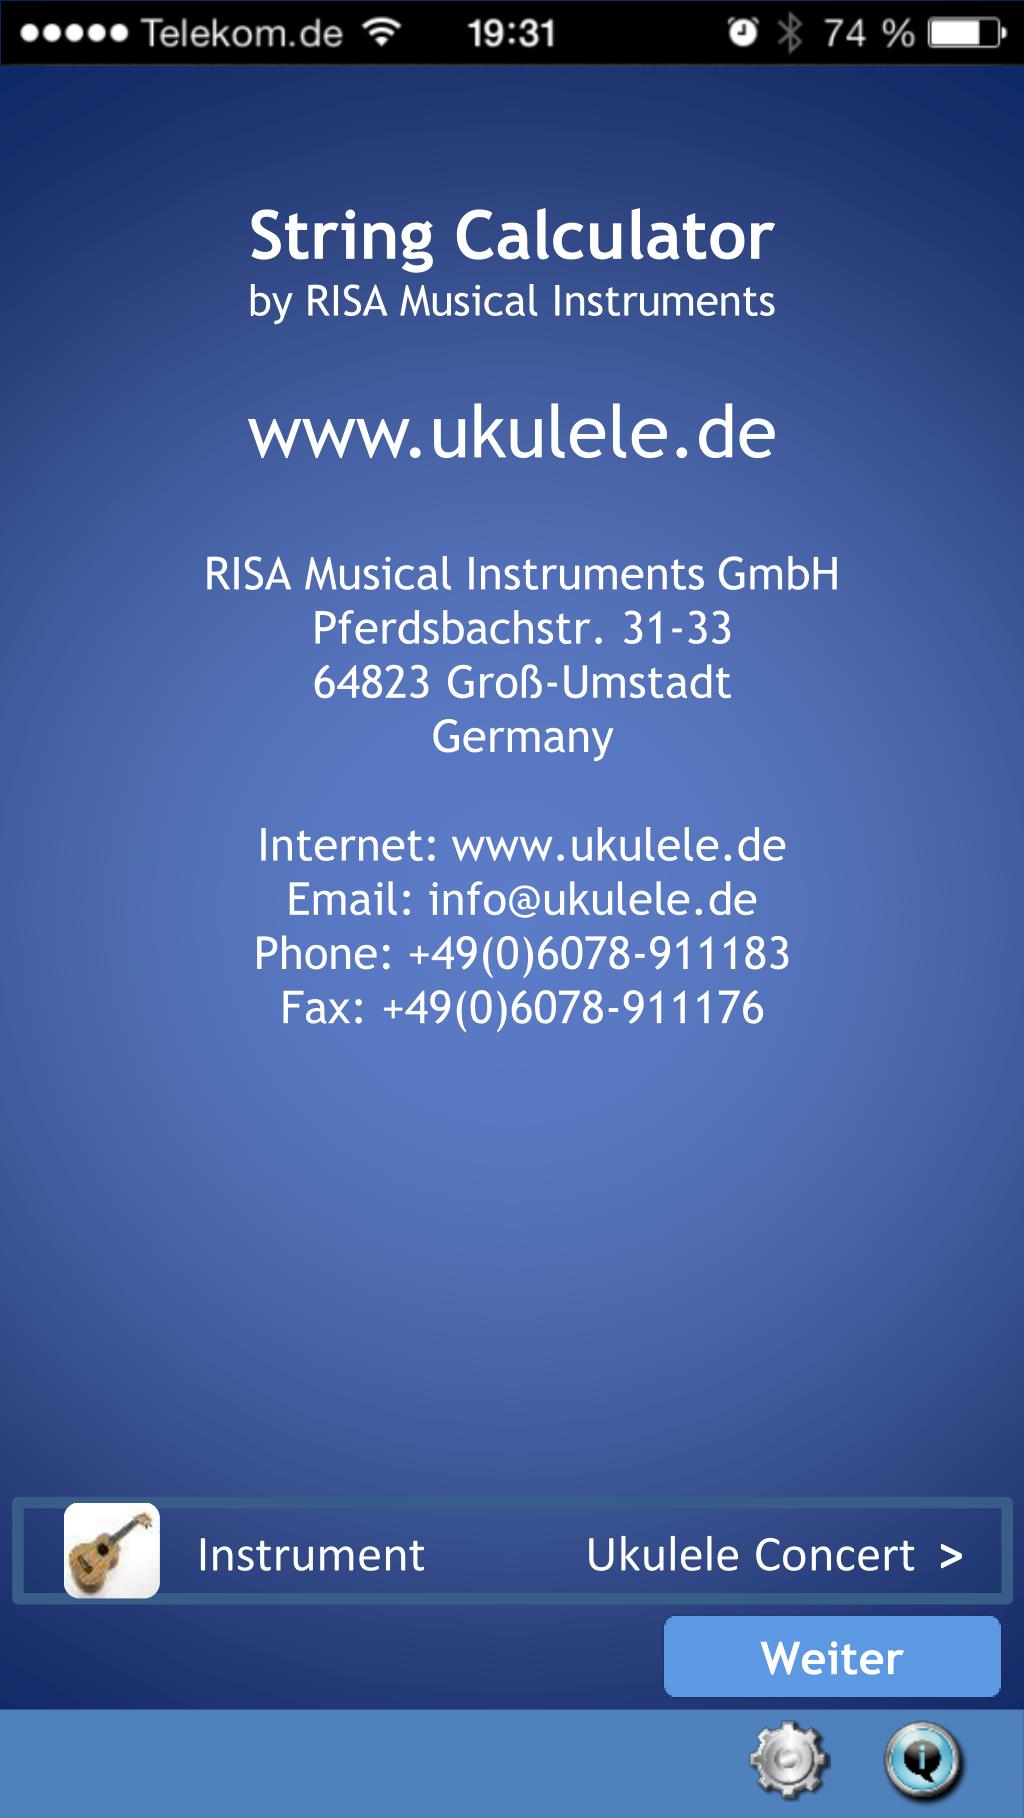 PPT - String Calculator by RISA Musical Instruments www.ukulele.de  PowerPoint Presentation - ID:1841063